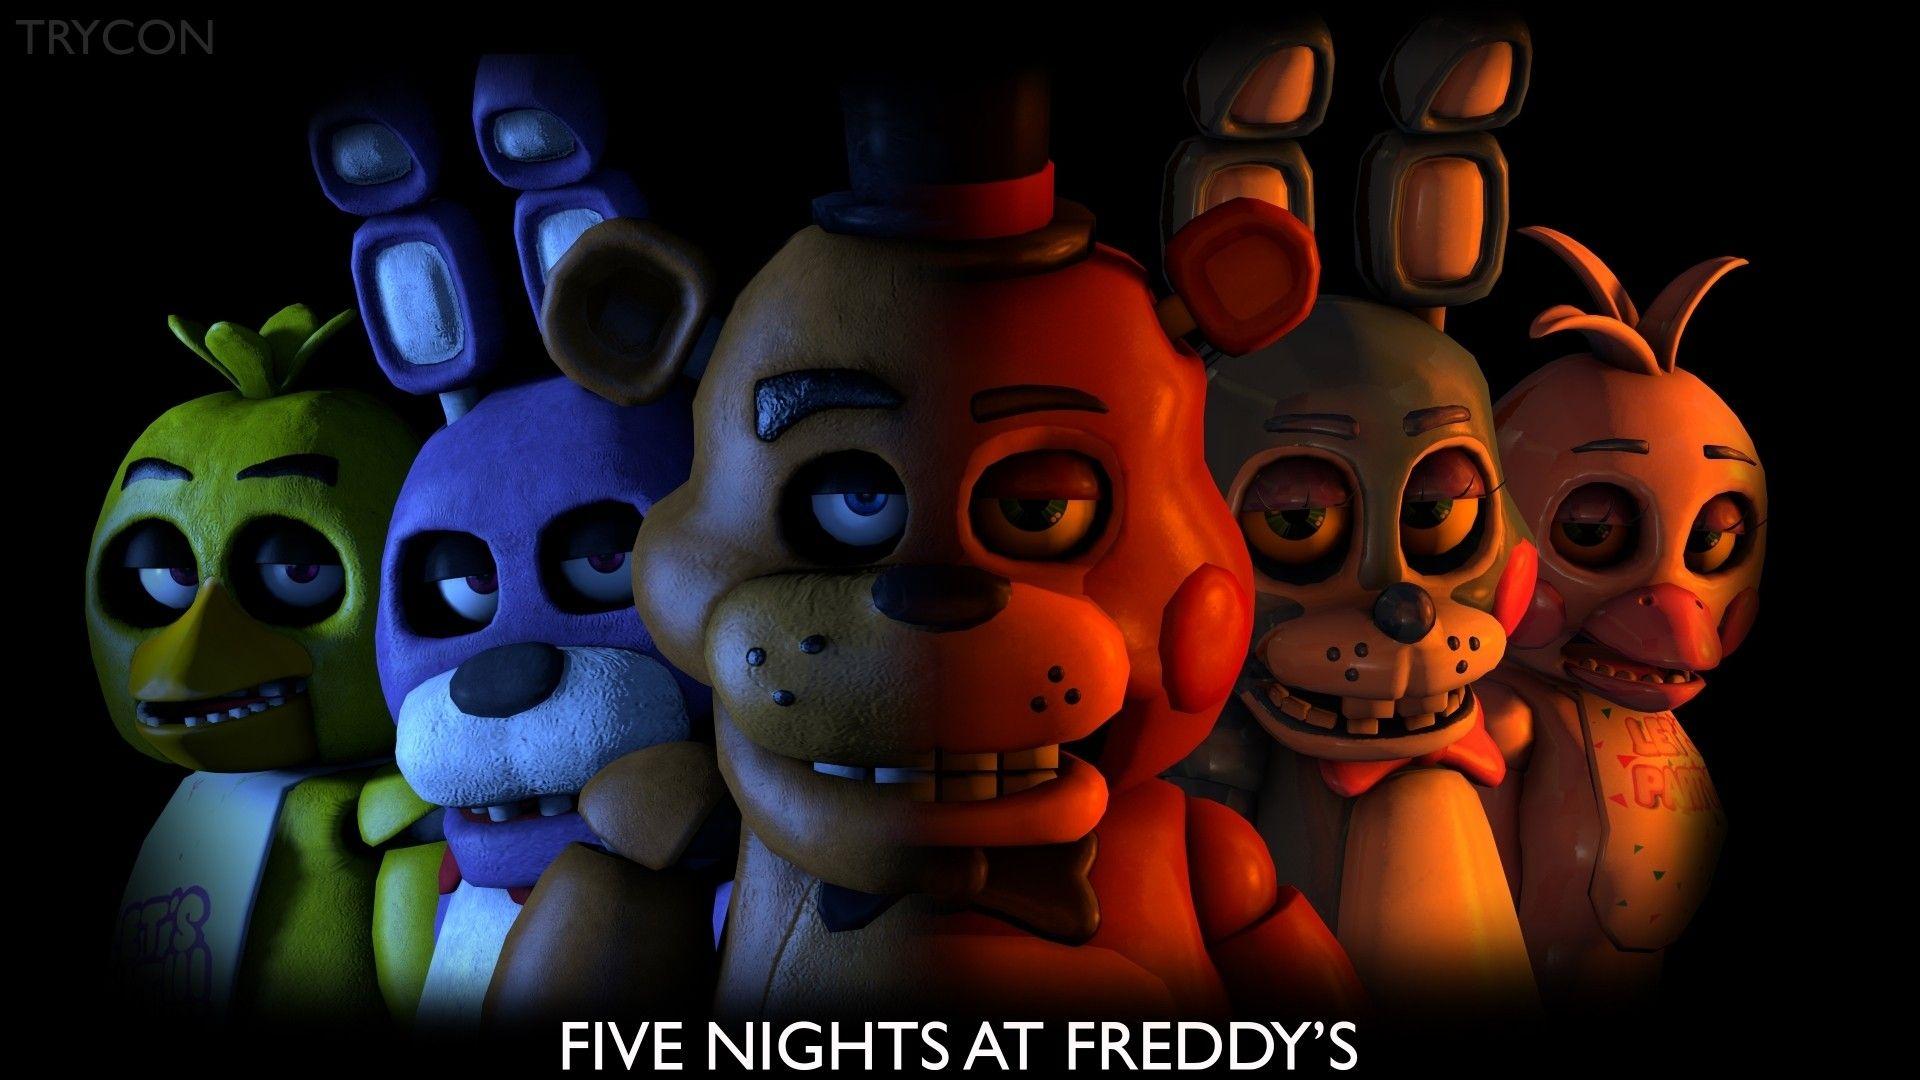 Five Nights At Freddy's wallpaperDownload free. Five